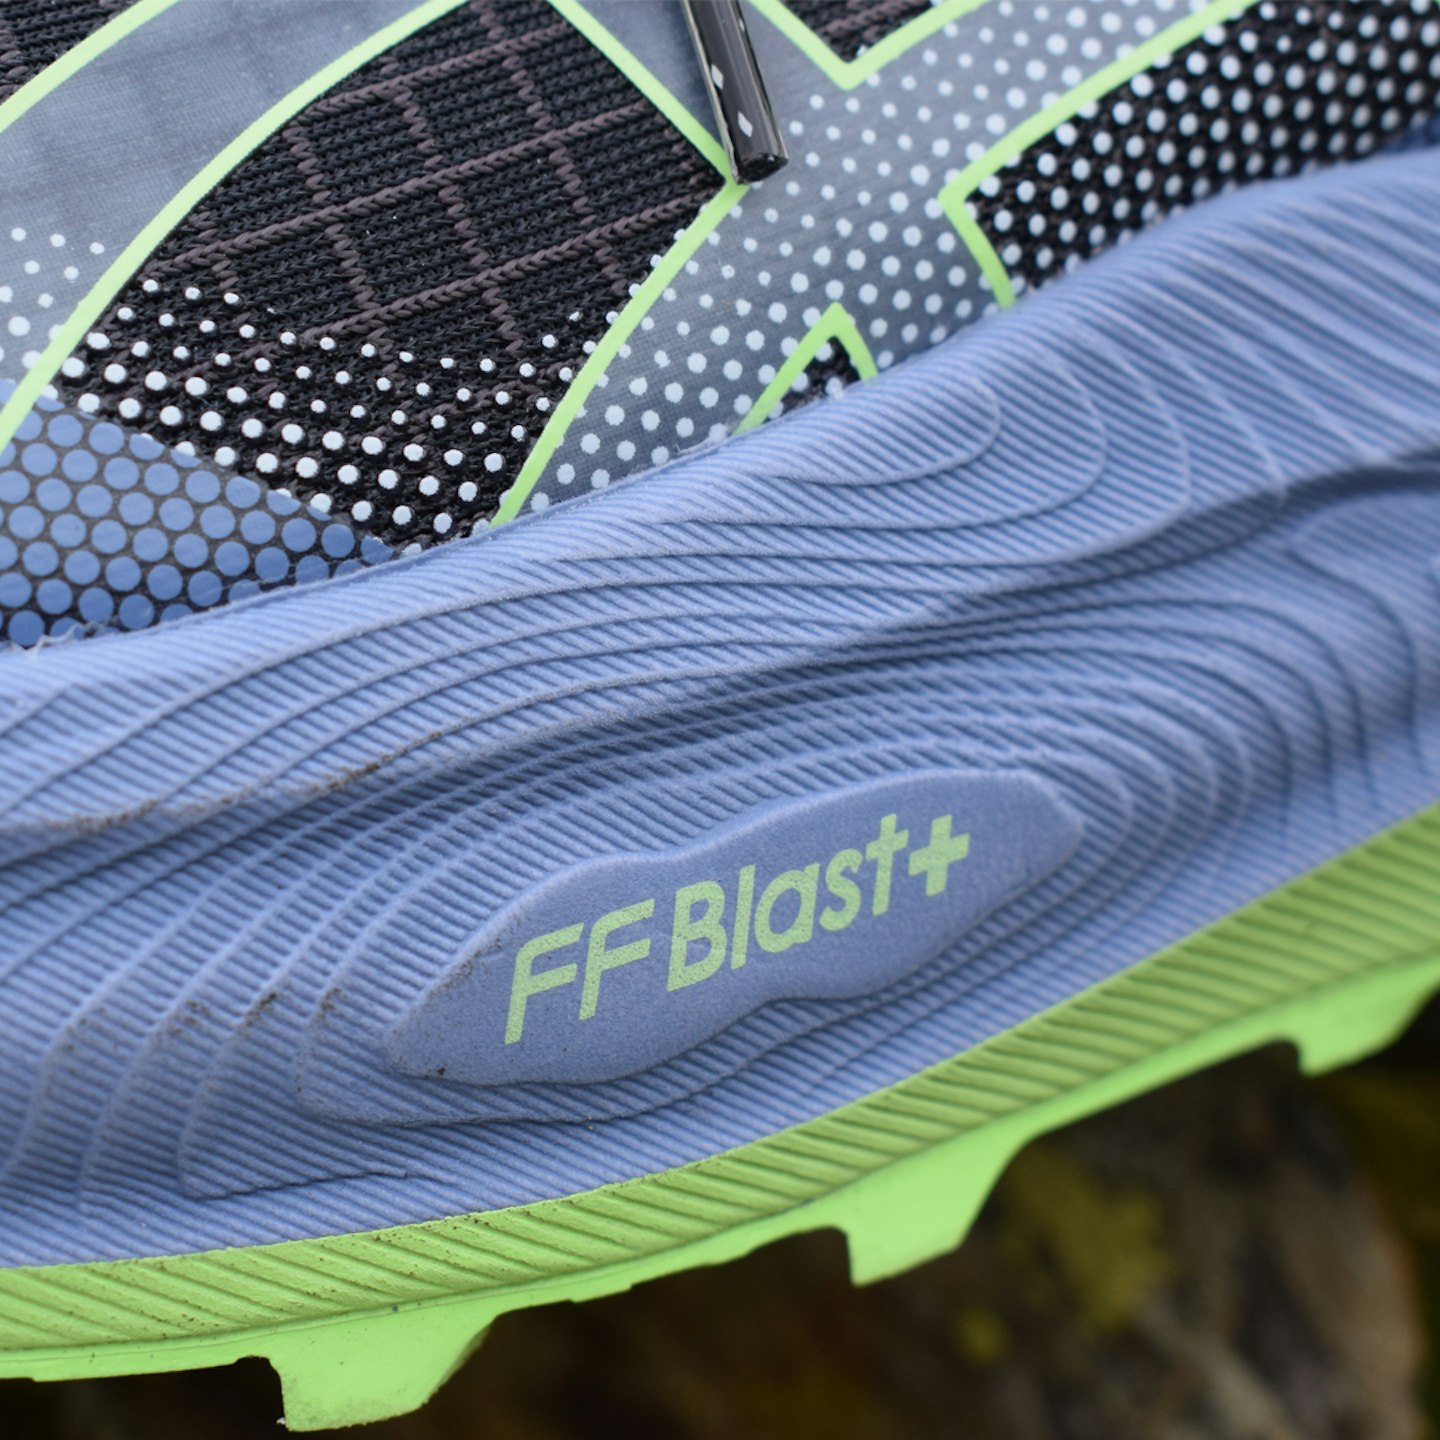 FF Blast foam midsole of Asics Trabuco Max 3 trail running shoes square cropped